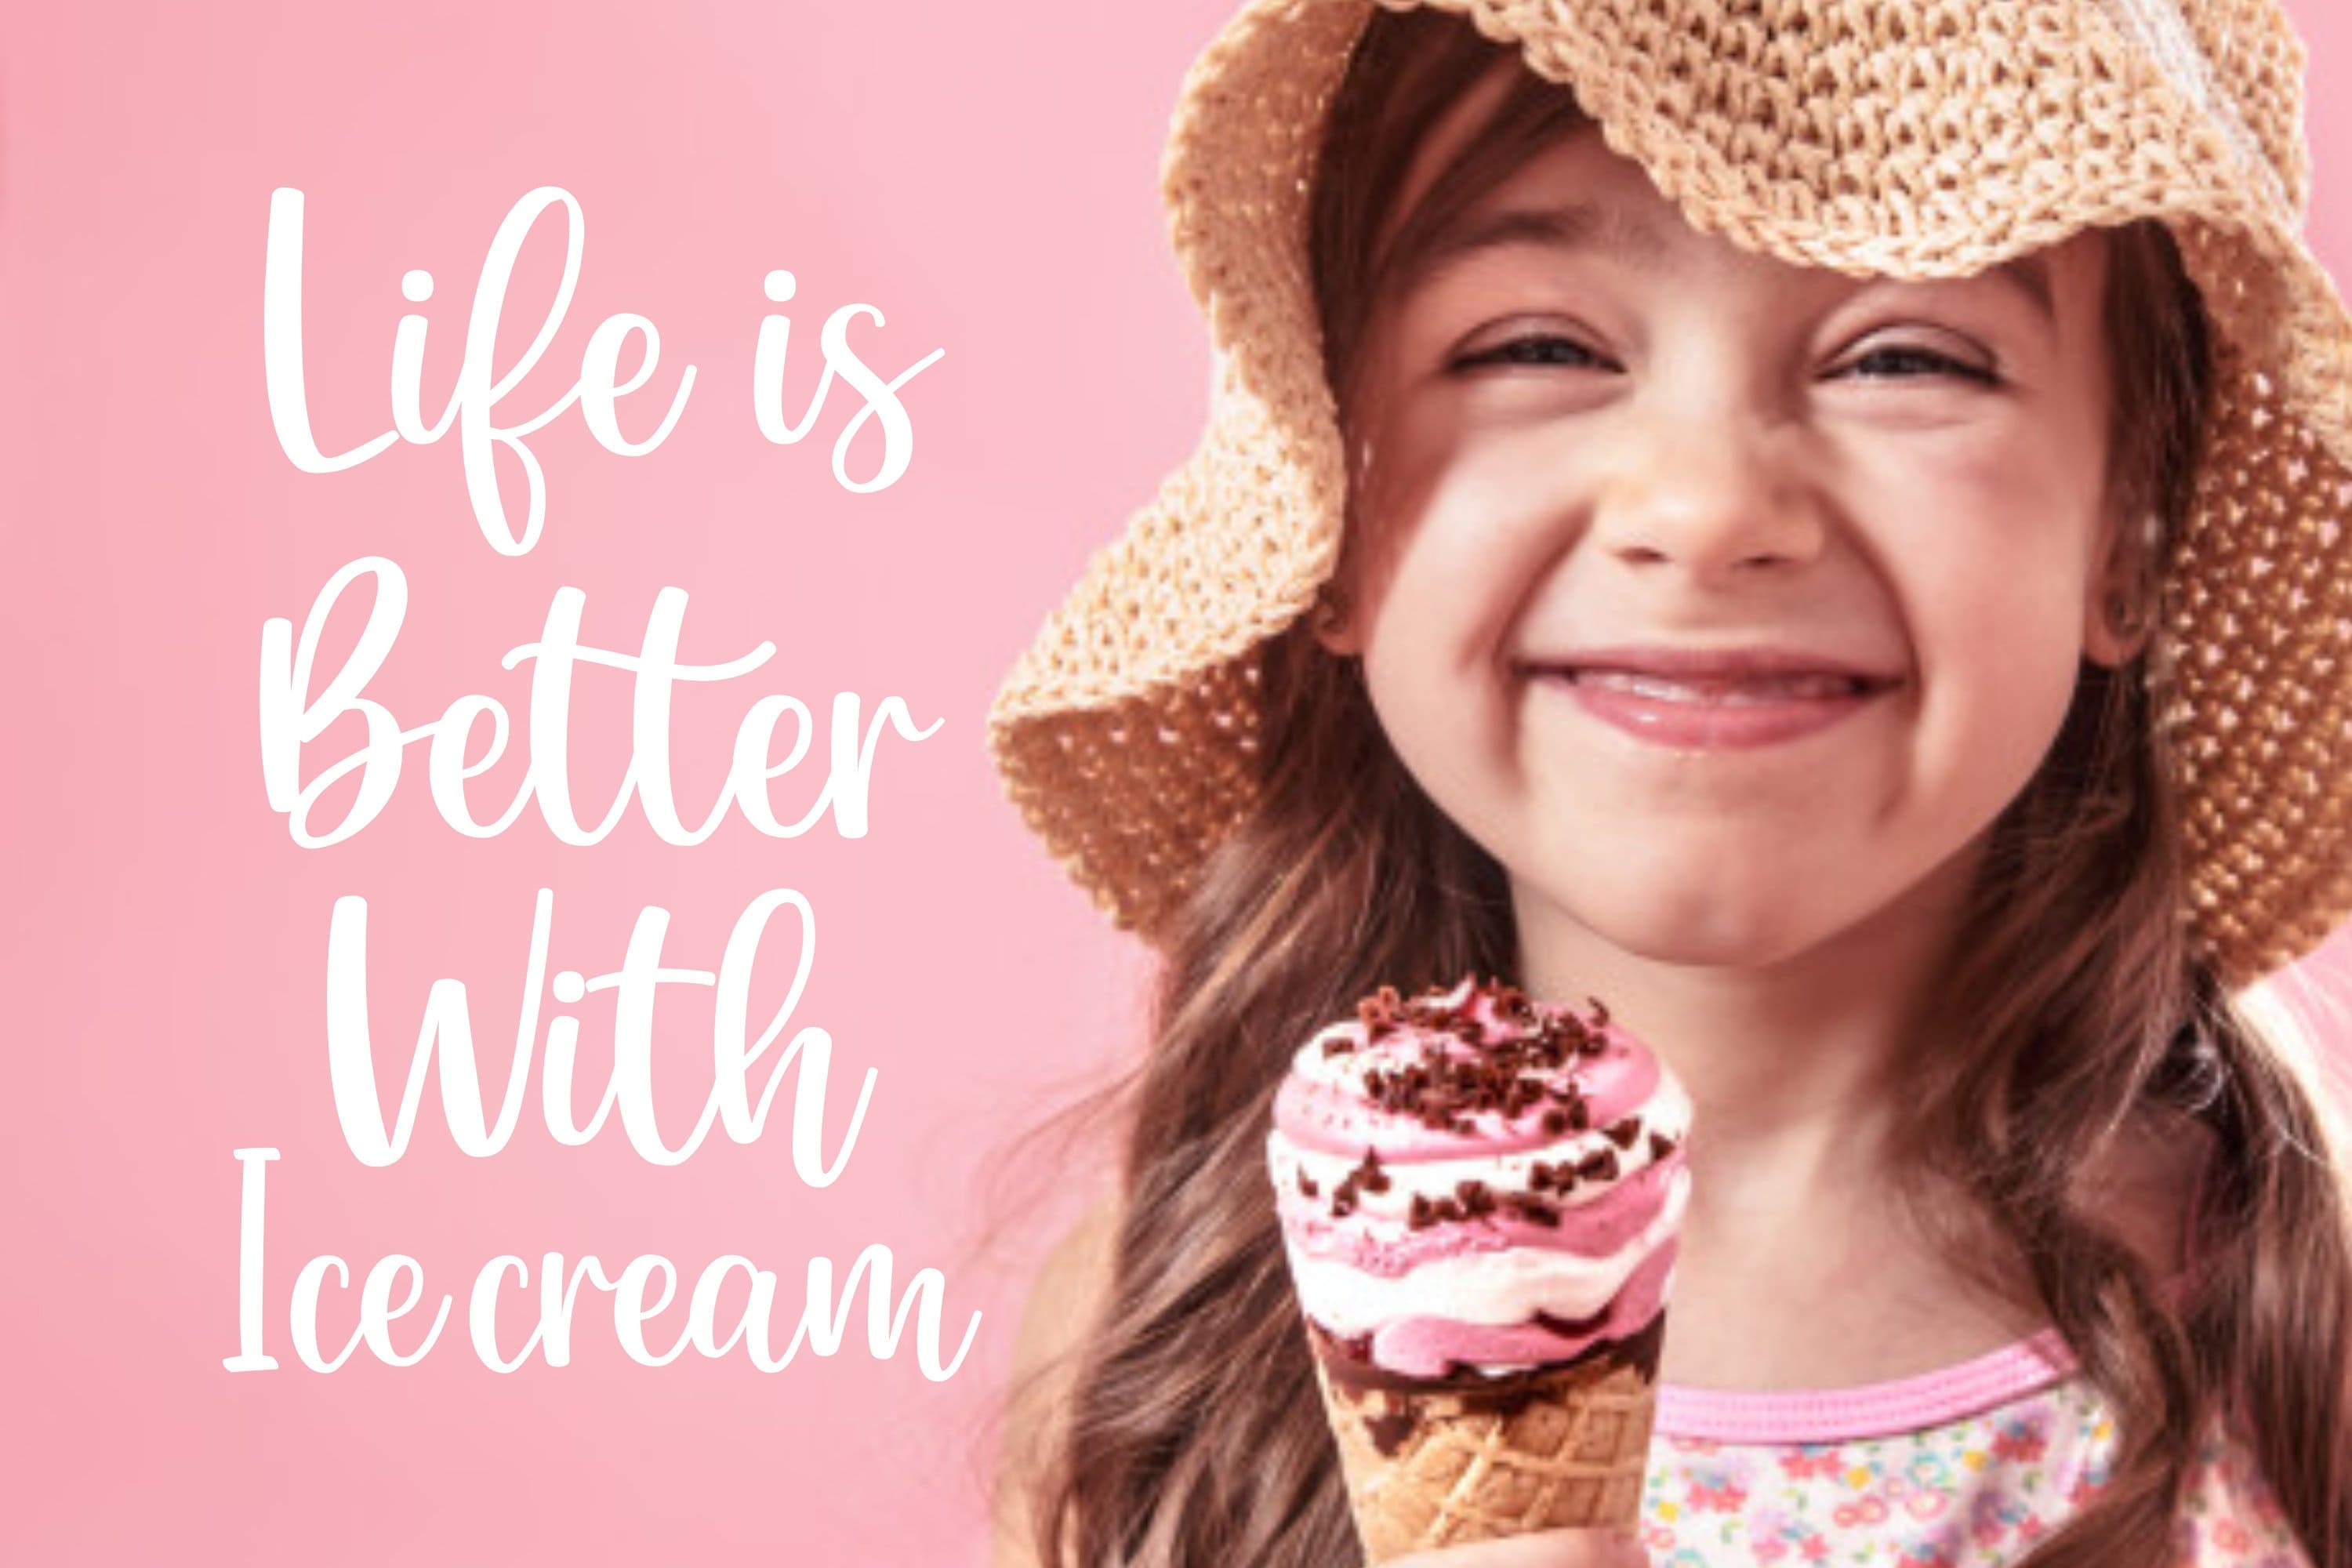 A girl in a summer hat "Life is Better with Icecream".